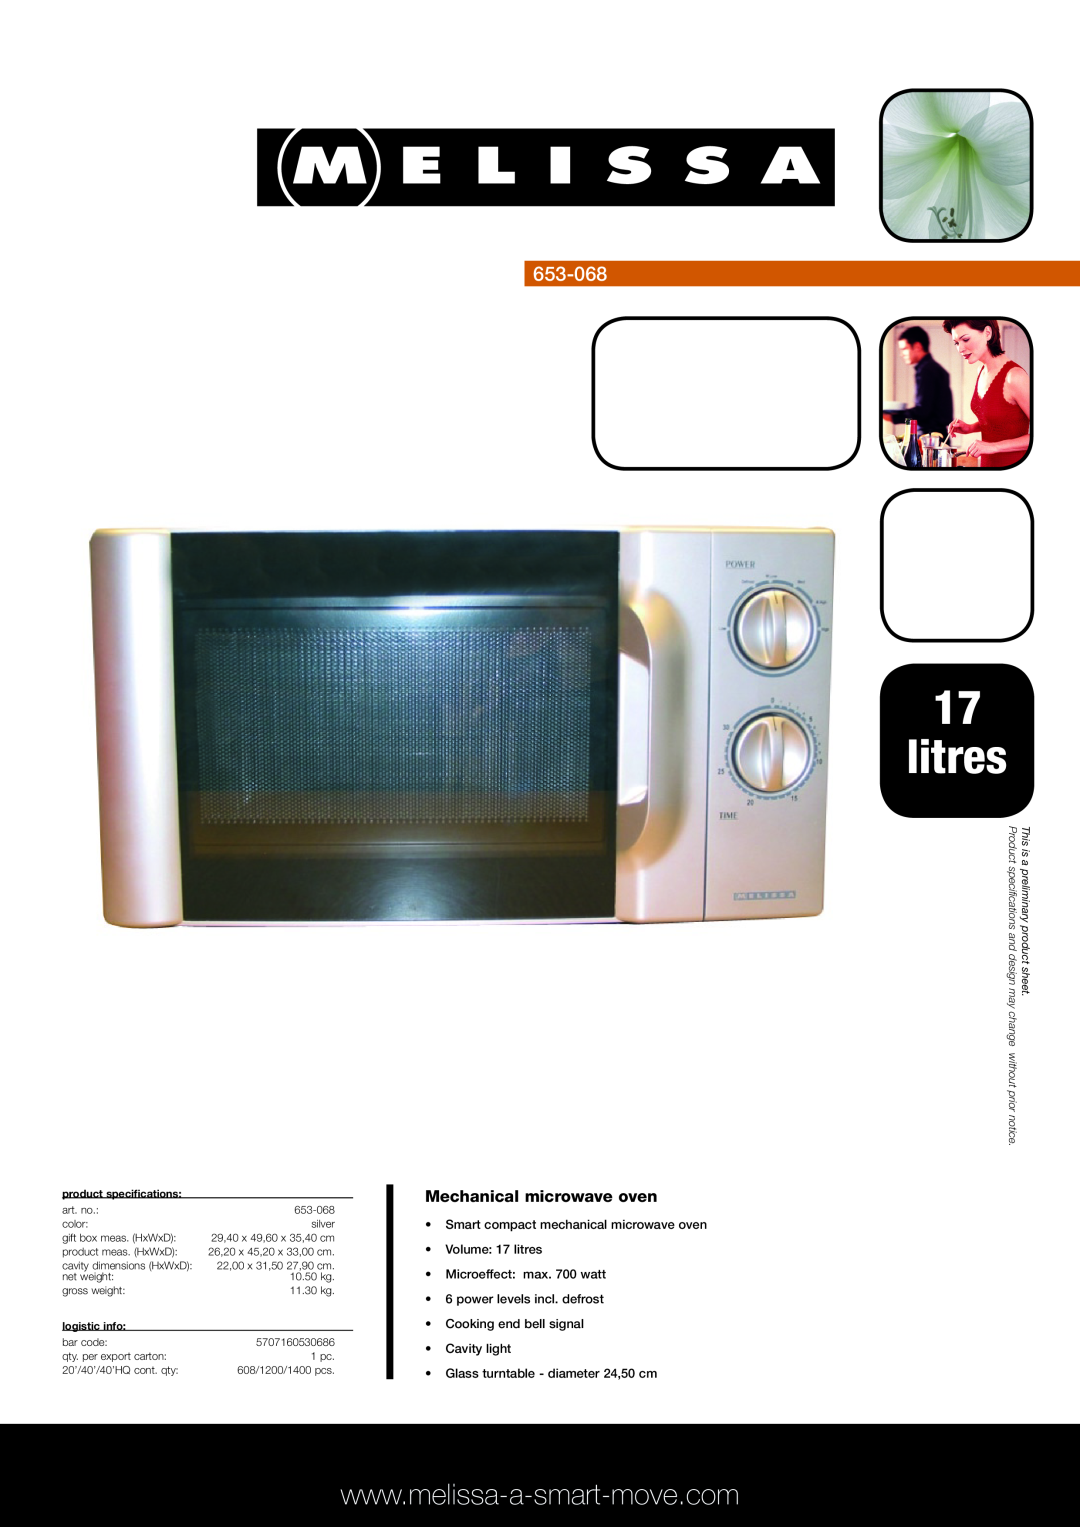 Melissa 653-068 specifications litres, Mechanical microwave oven, Smart compact mechanical microwave oven, logistic info 